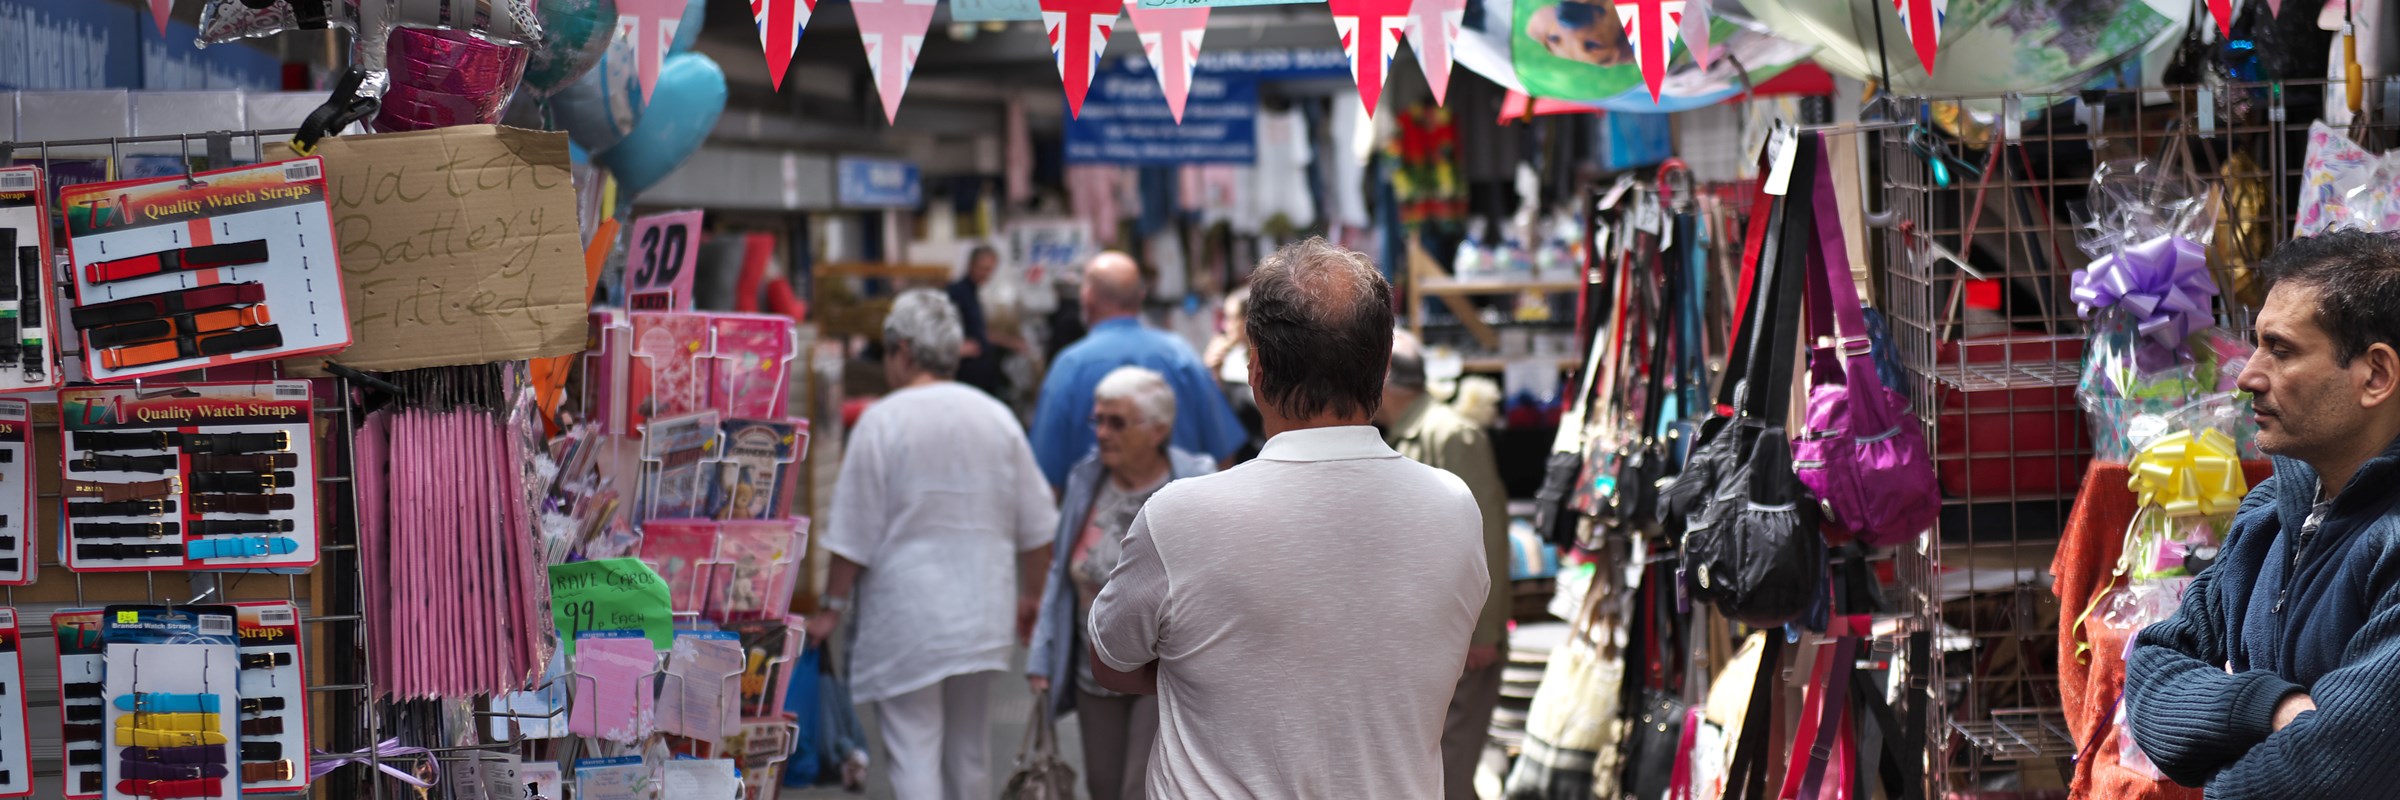 Market stalls and shoppers in Bury